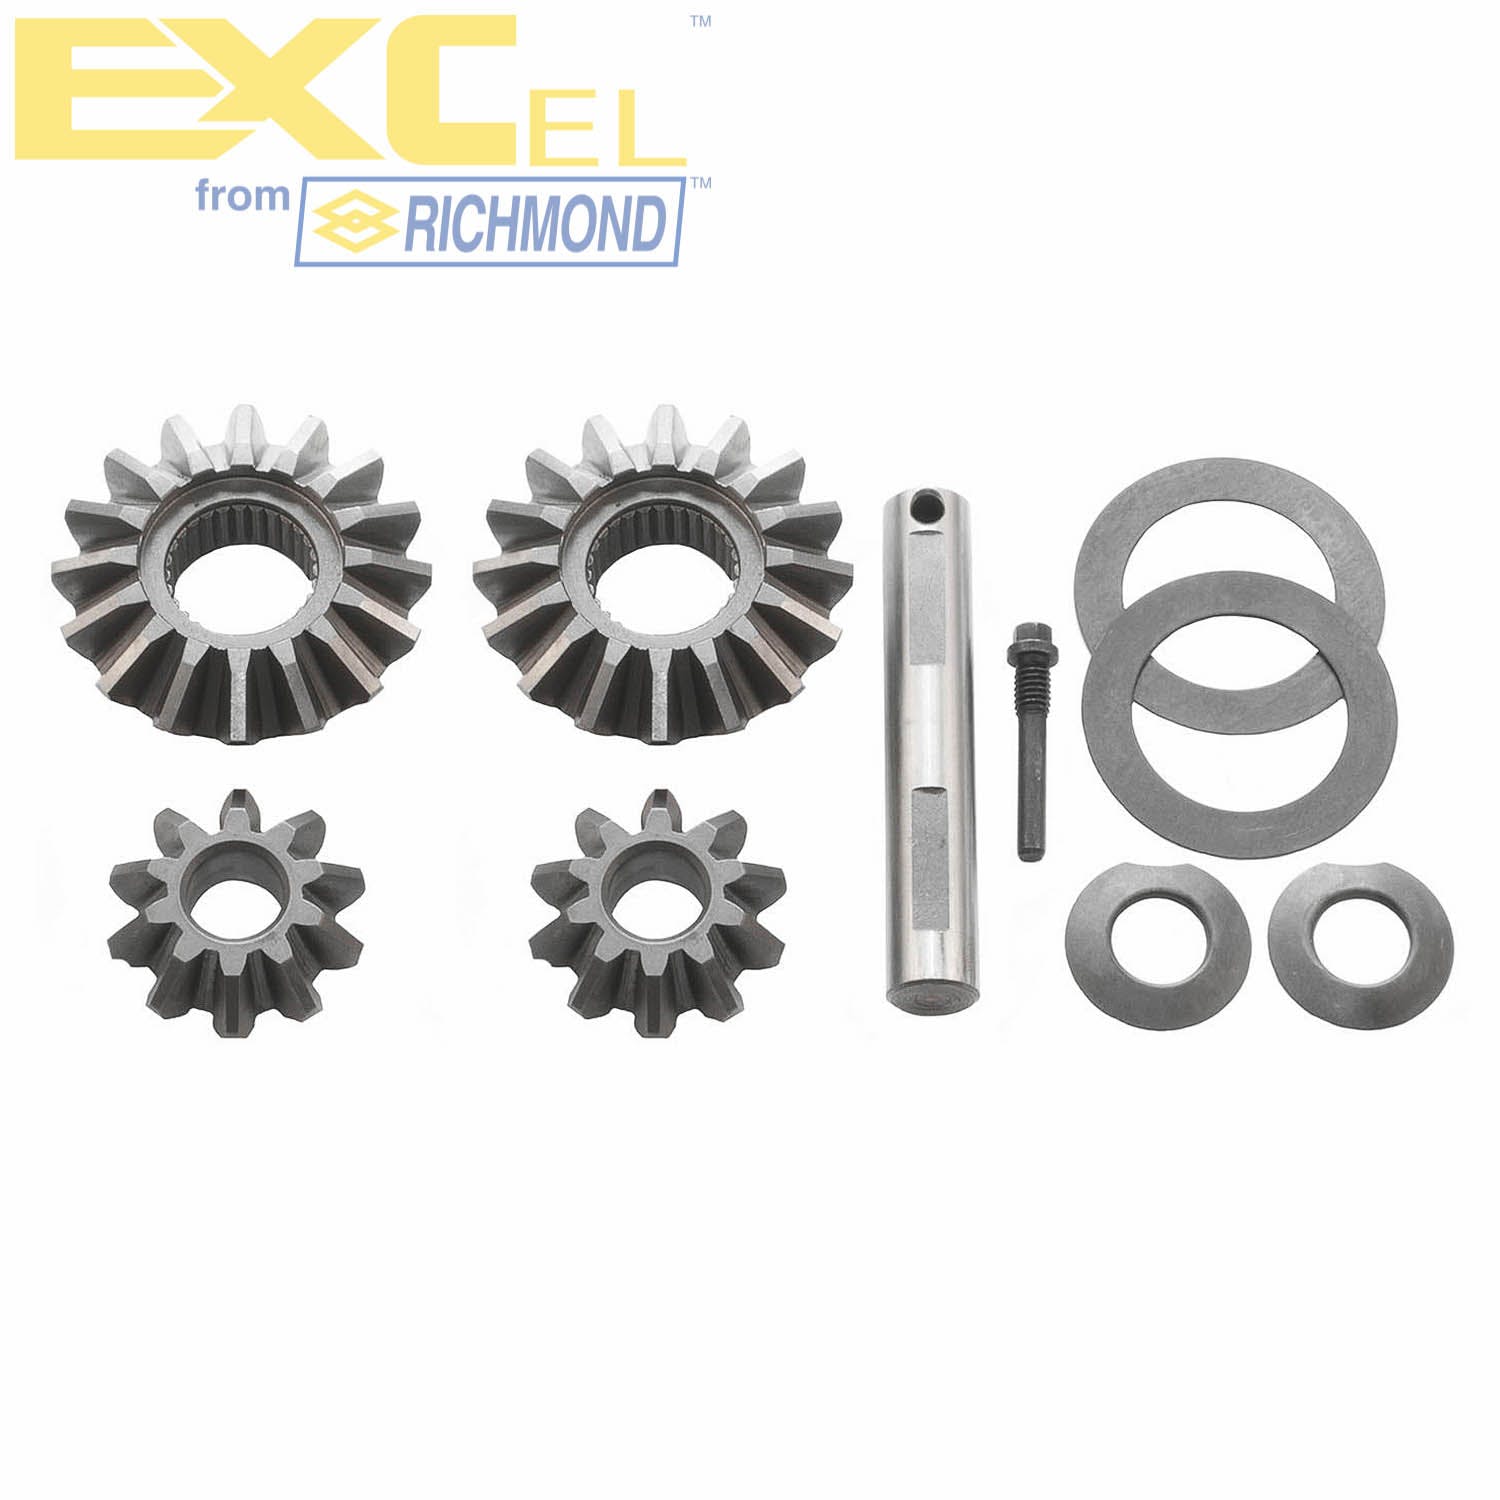 Excel XL-4012 Differential Carrier Gear Kit